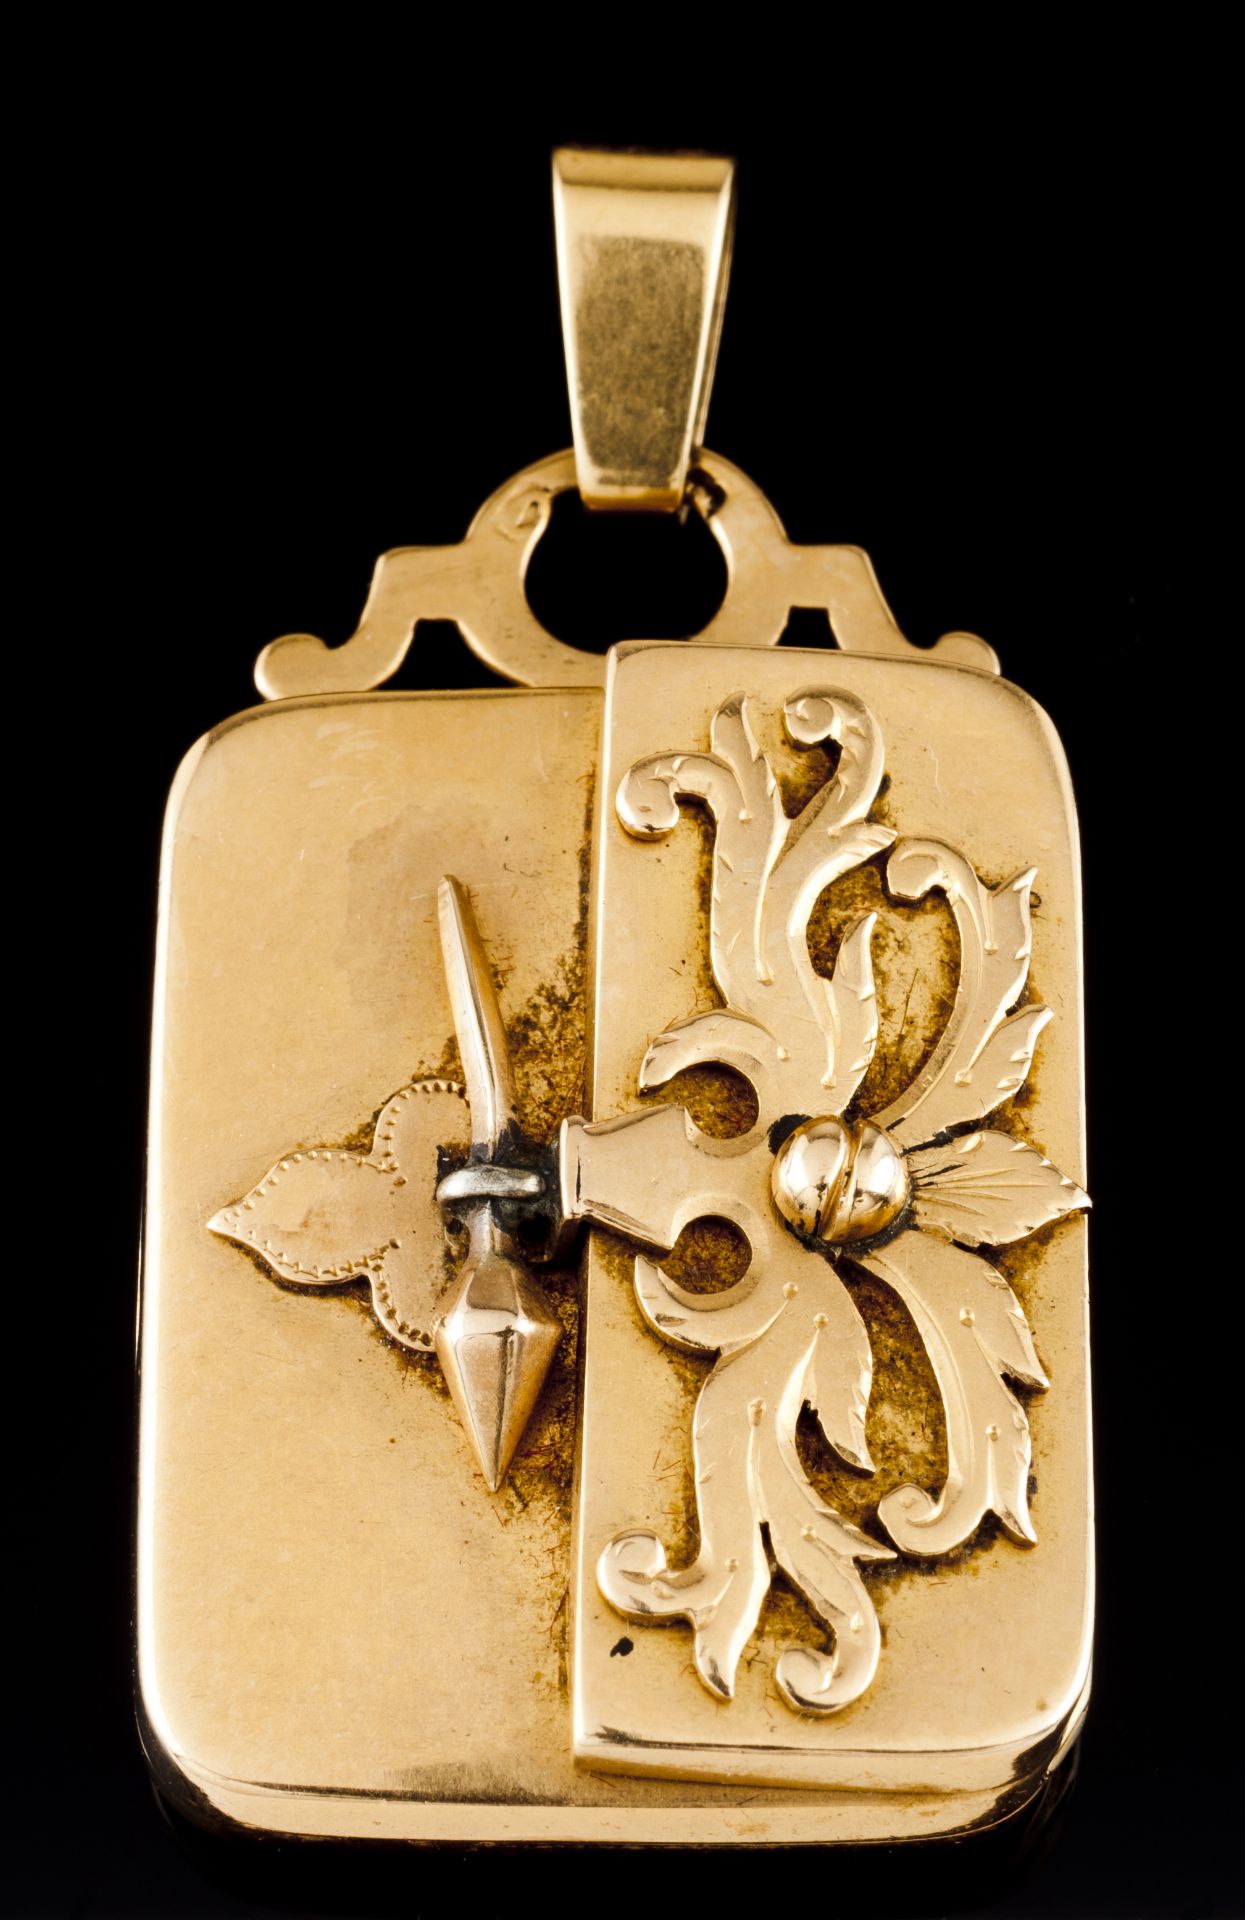 A reliquary pendantPortuguese gold, 19th century Stylised foliage element and guilloche decoration